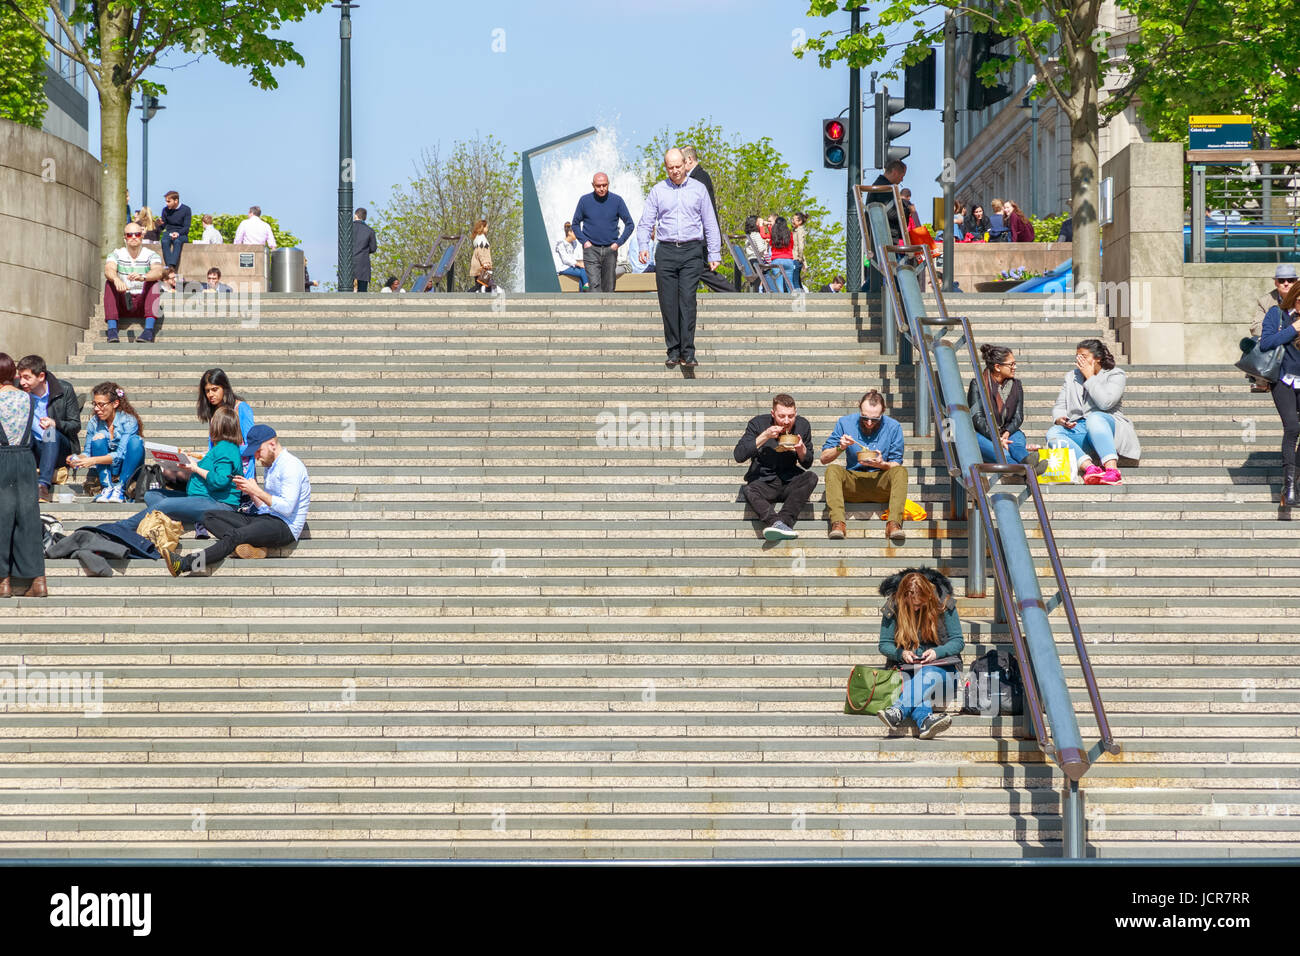 London, UK - May 10, 2017 - People sitting and eating on Cubitt Steps in Canary Wharf on a sunny day Stock Photo